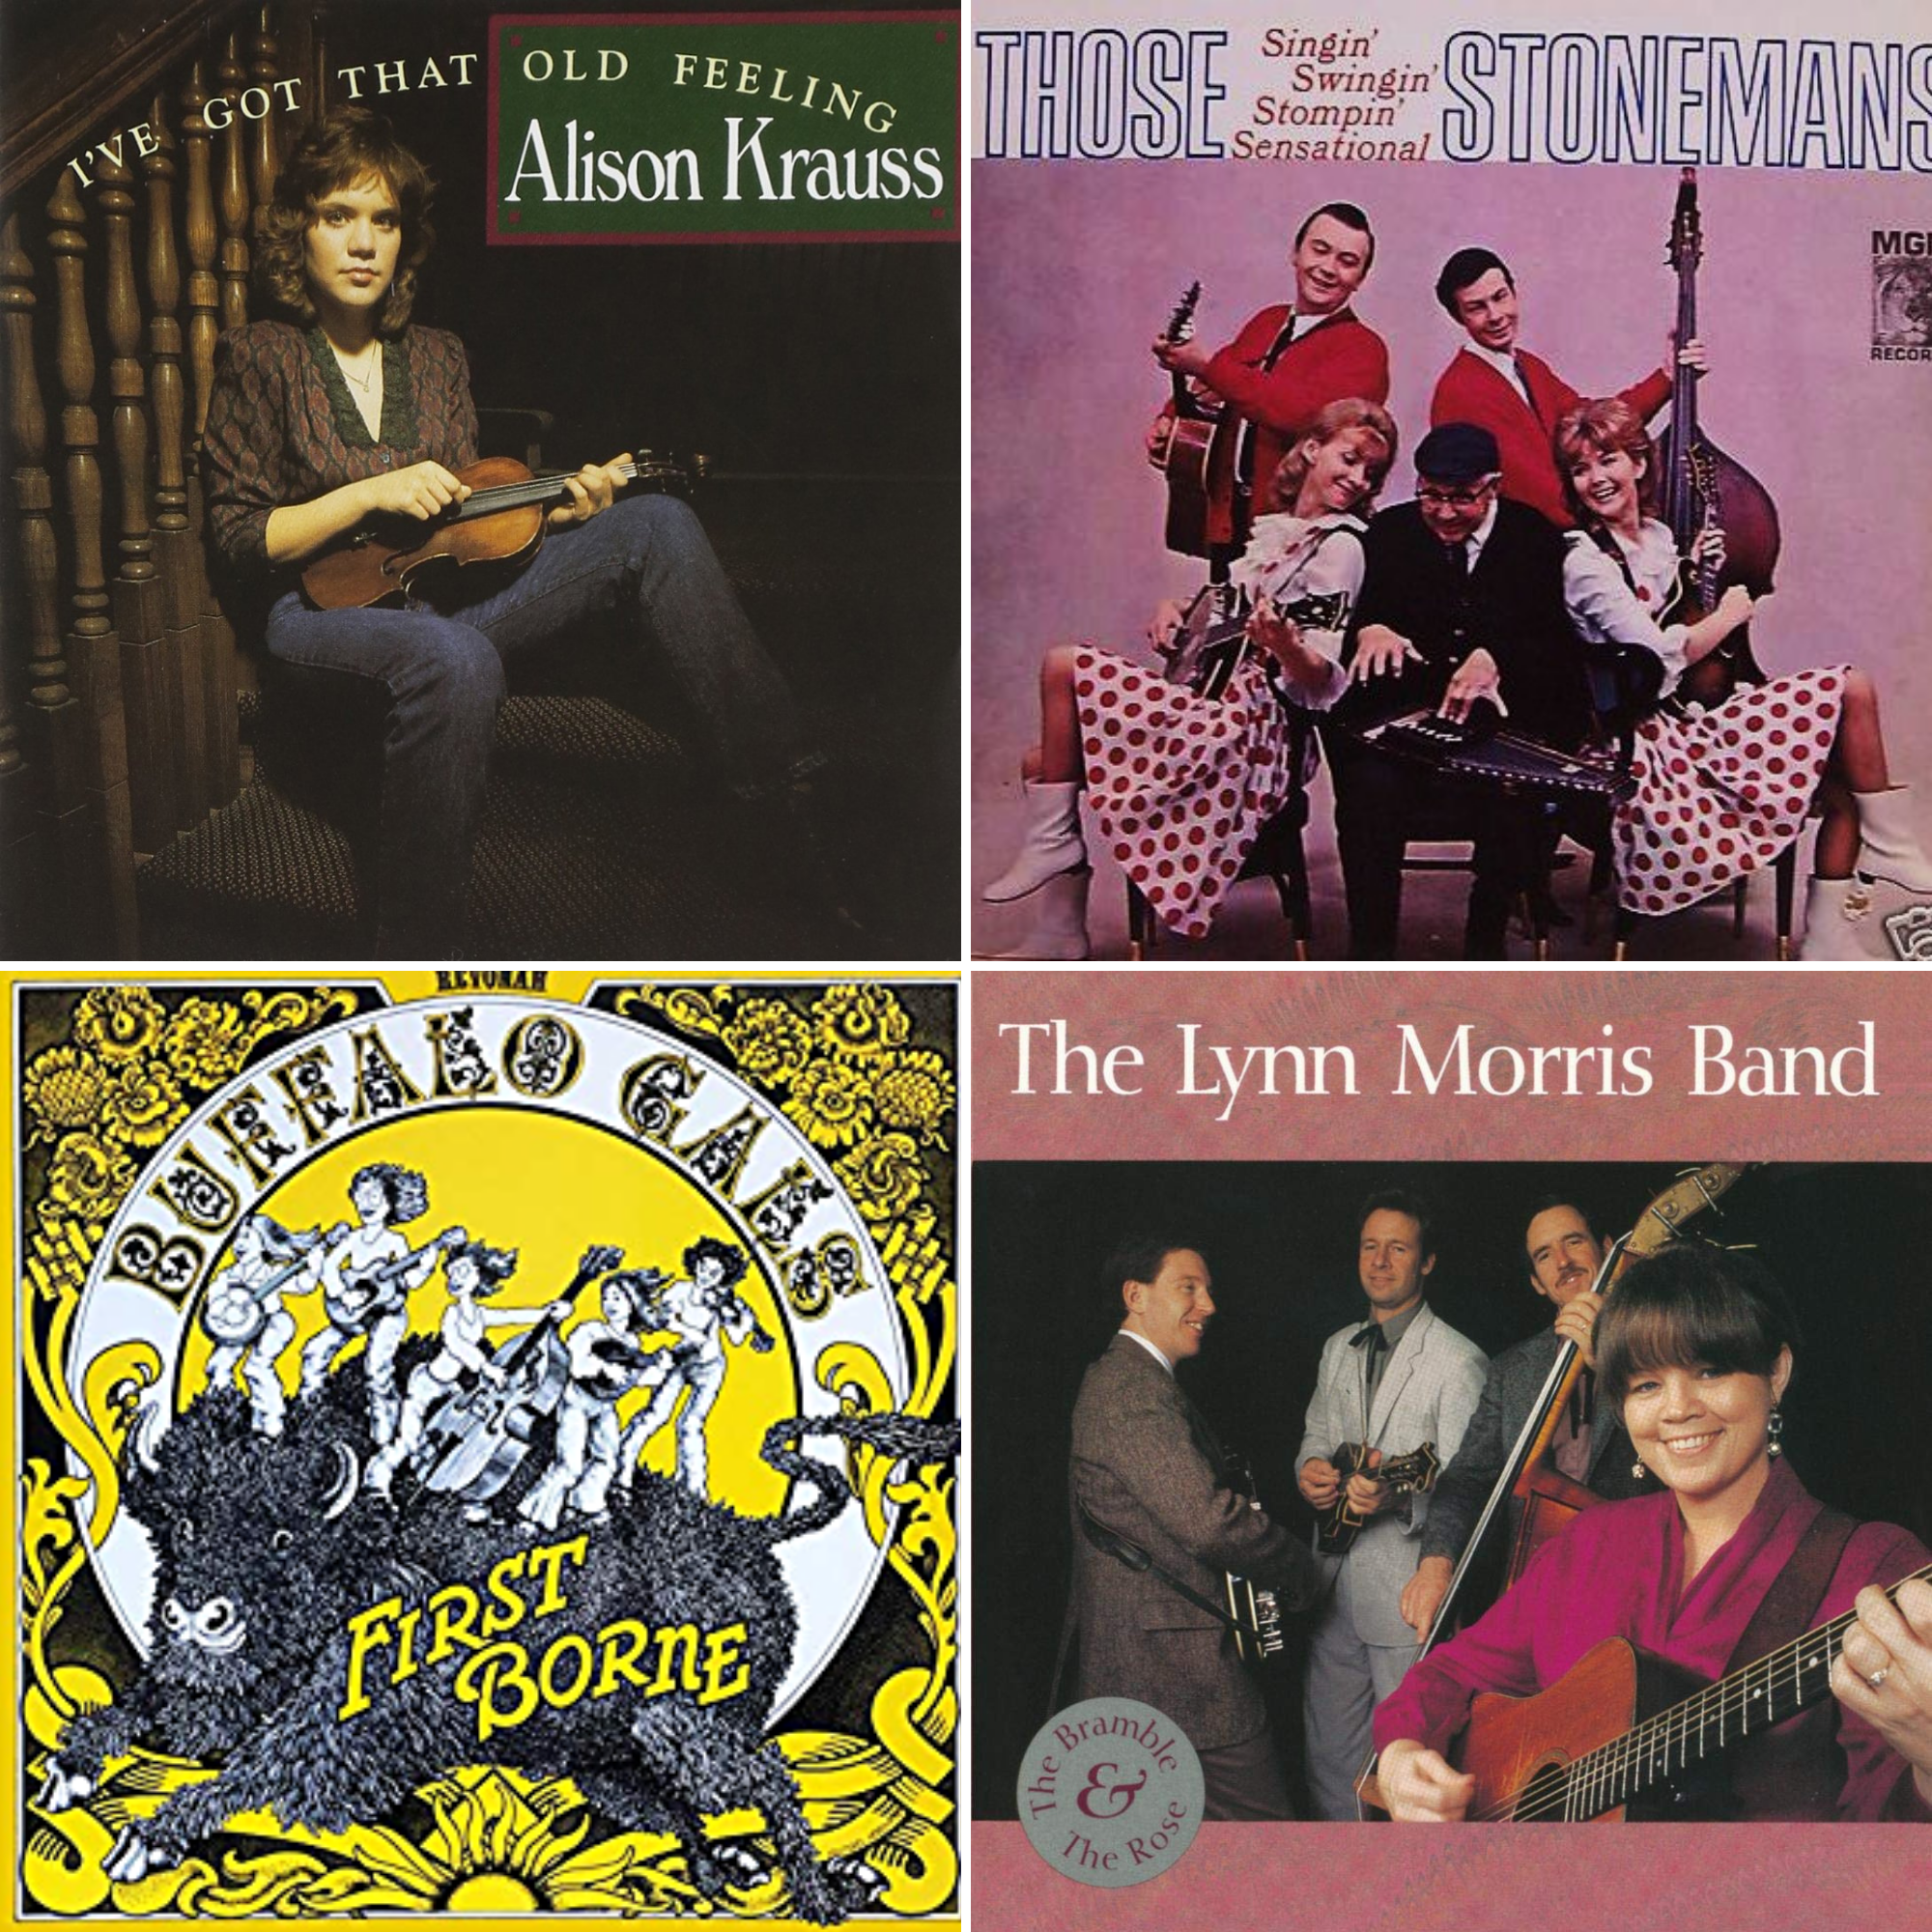 Give Me the Wintertime: 10 Bluegrass Songs for the Cold